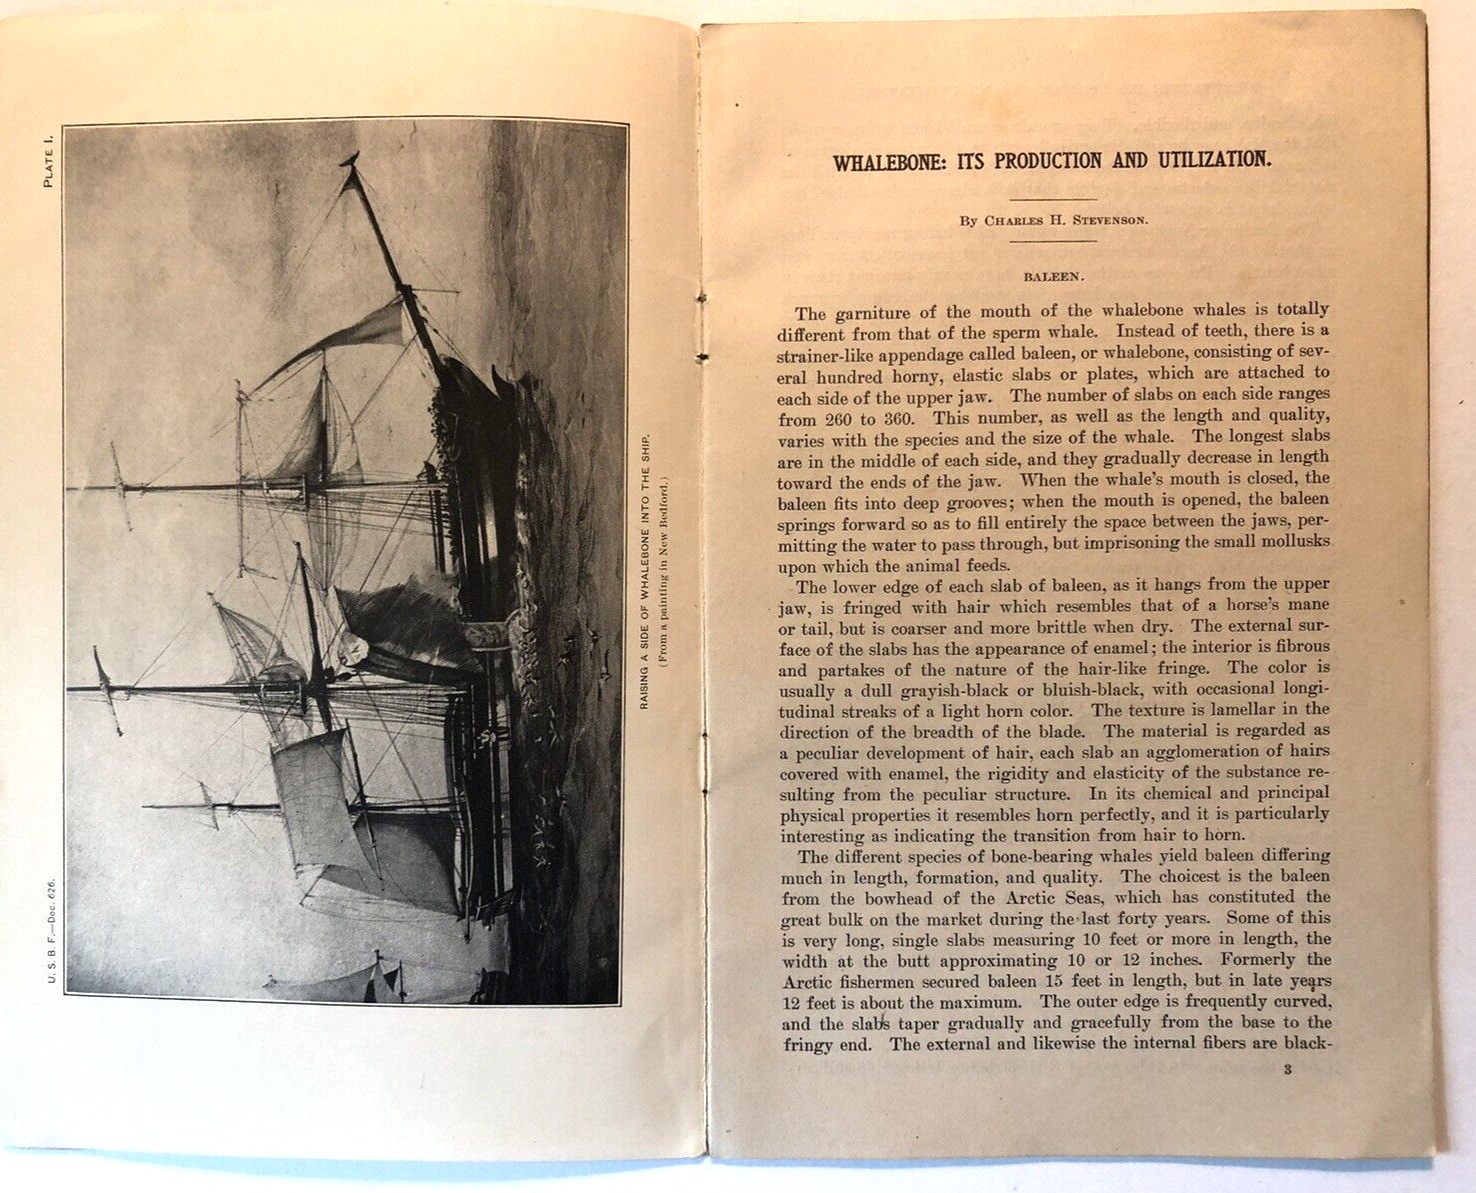 DEPARTMENT OF FISHERIES 1907 WHALEBONE: Its Production and Utilization First Ed.